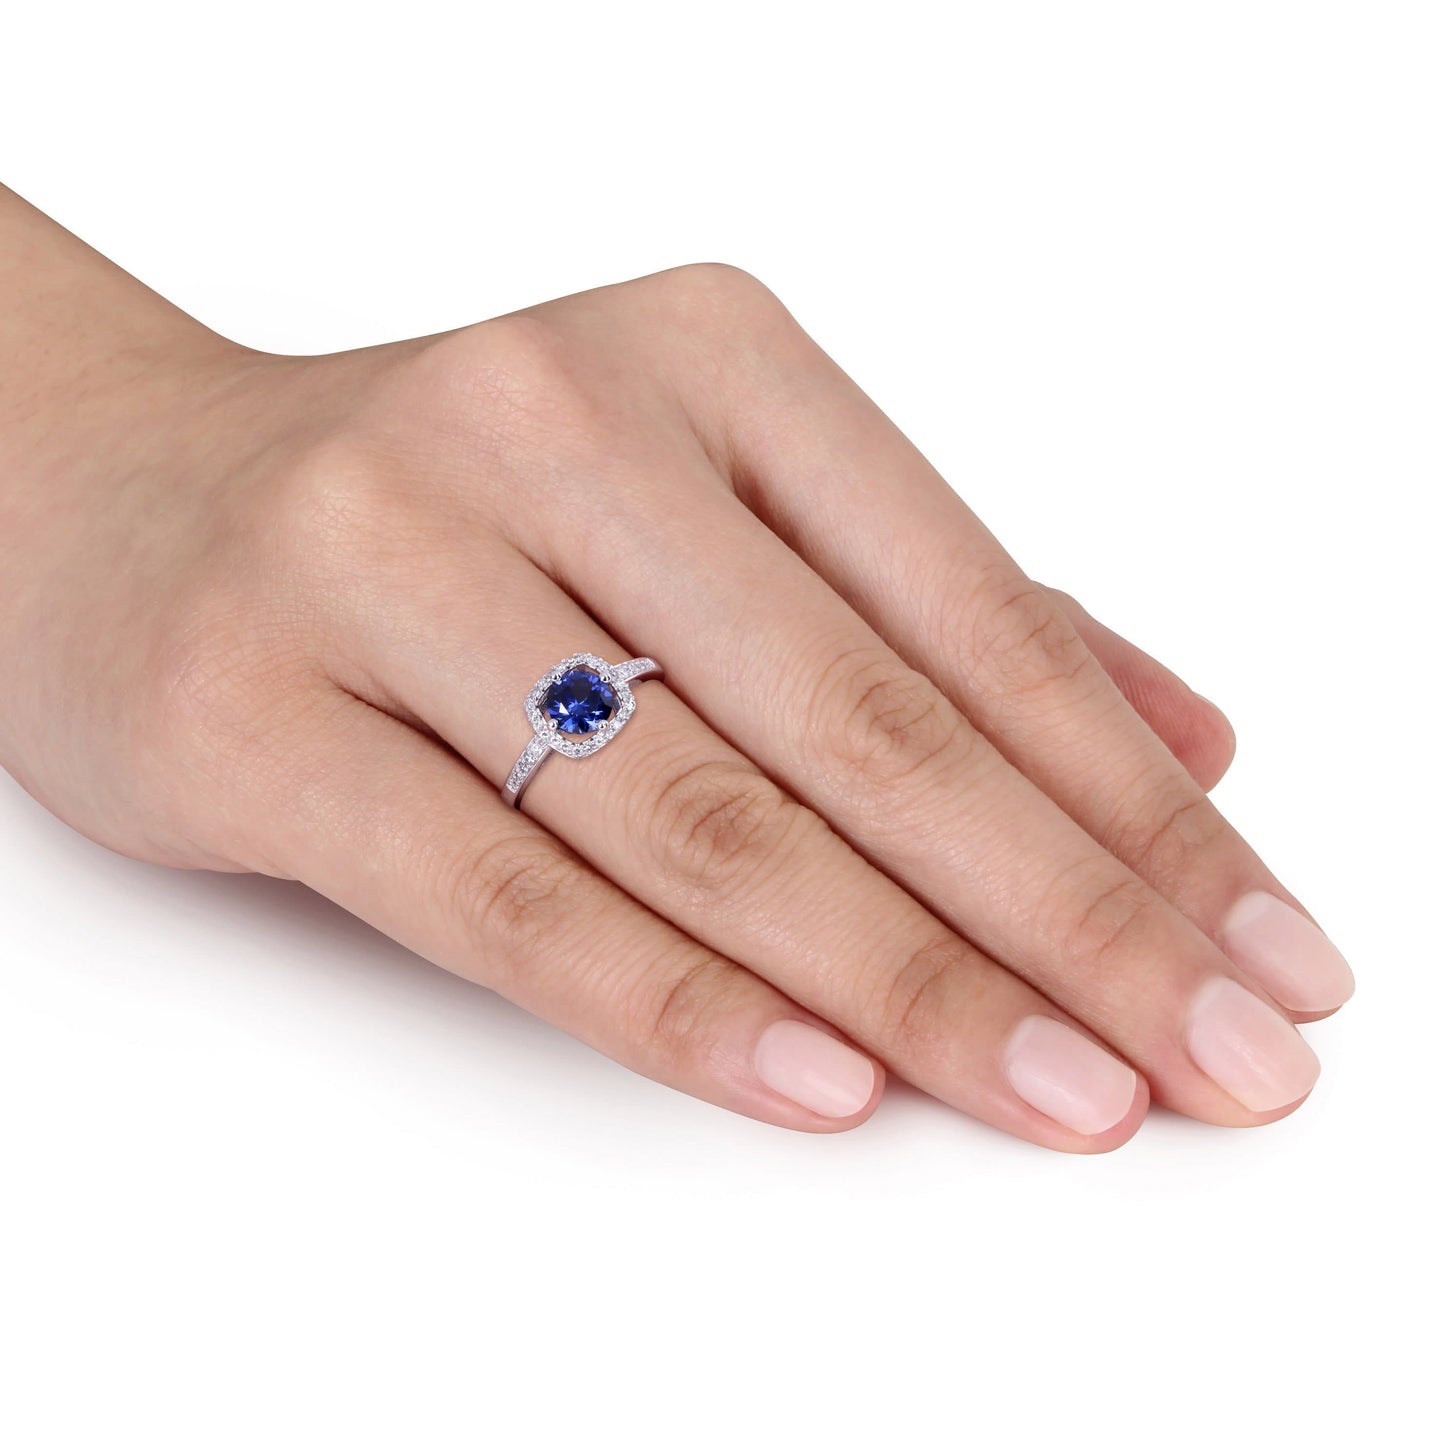 Julie Leah Blue Sapphire & Diamond Halo Ring in 10k White Gold